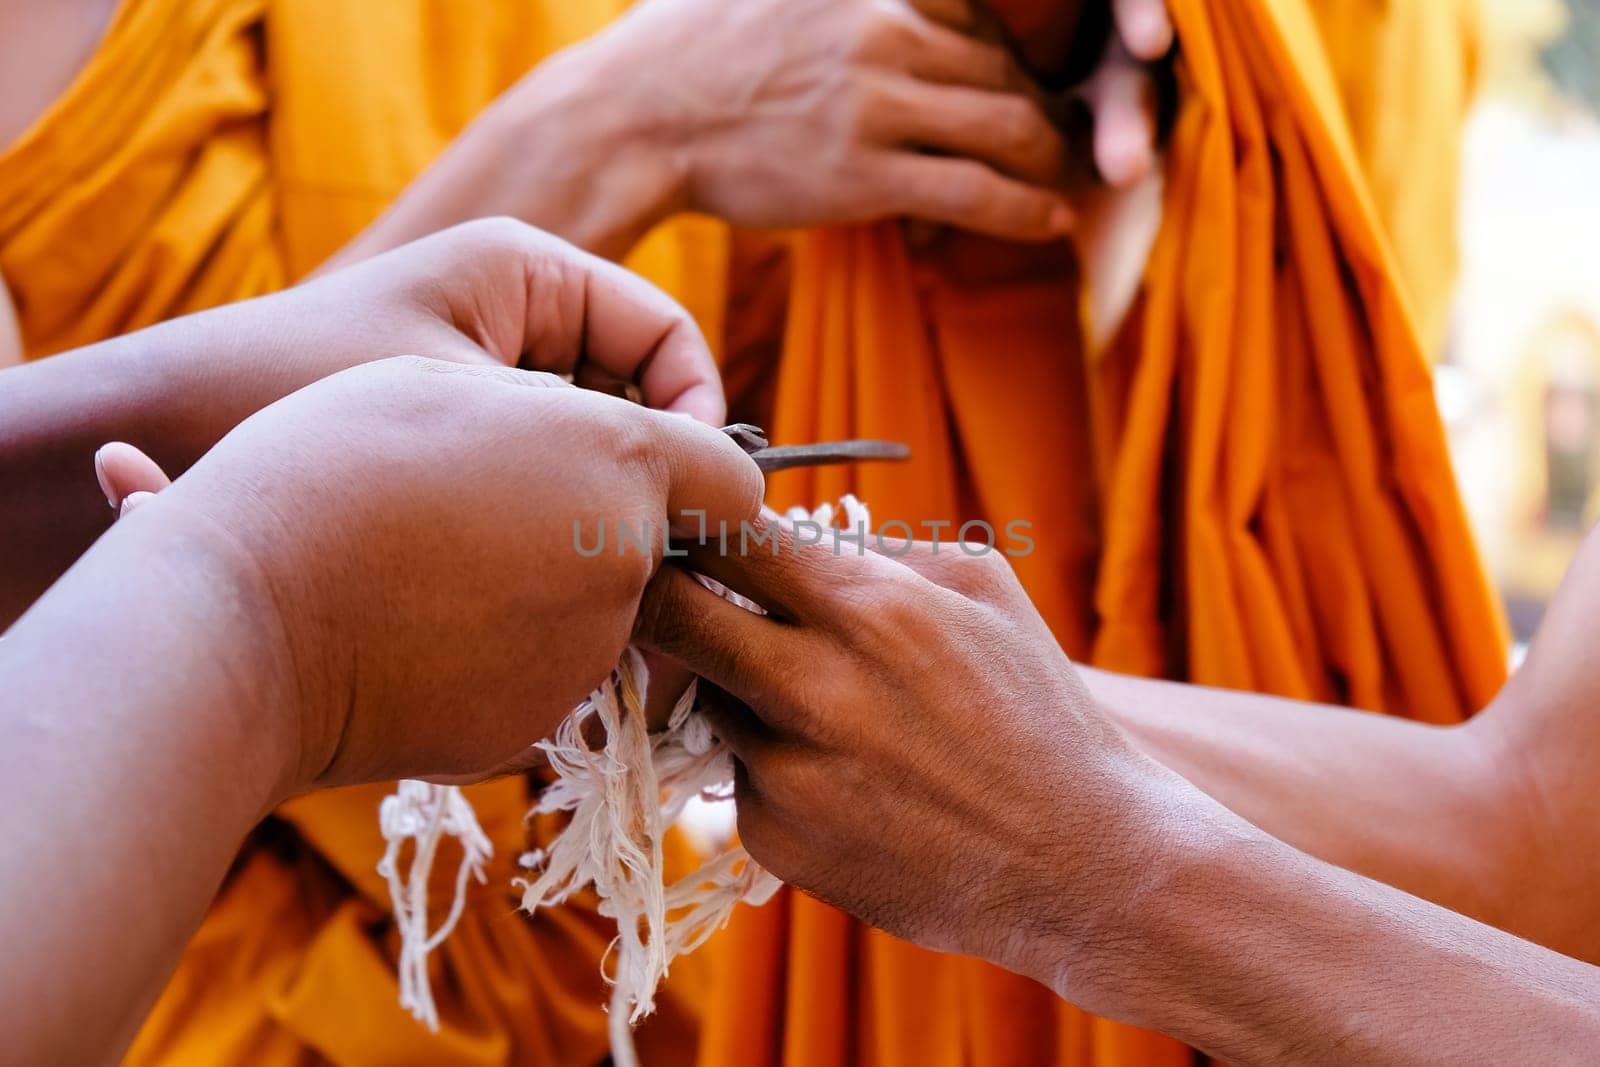 Image of ordination ceremony in buddhism, ceremonial thread